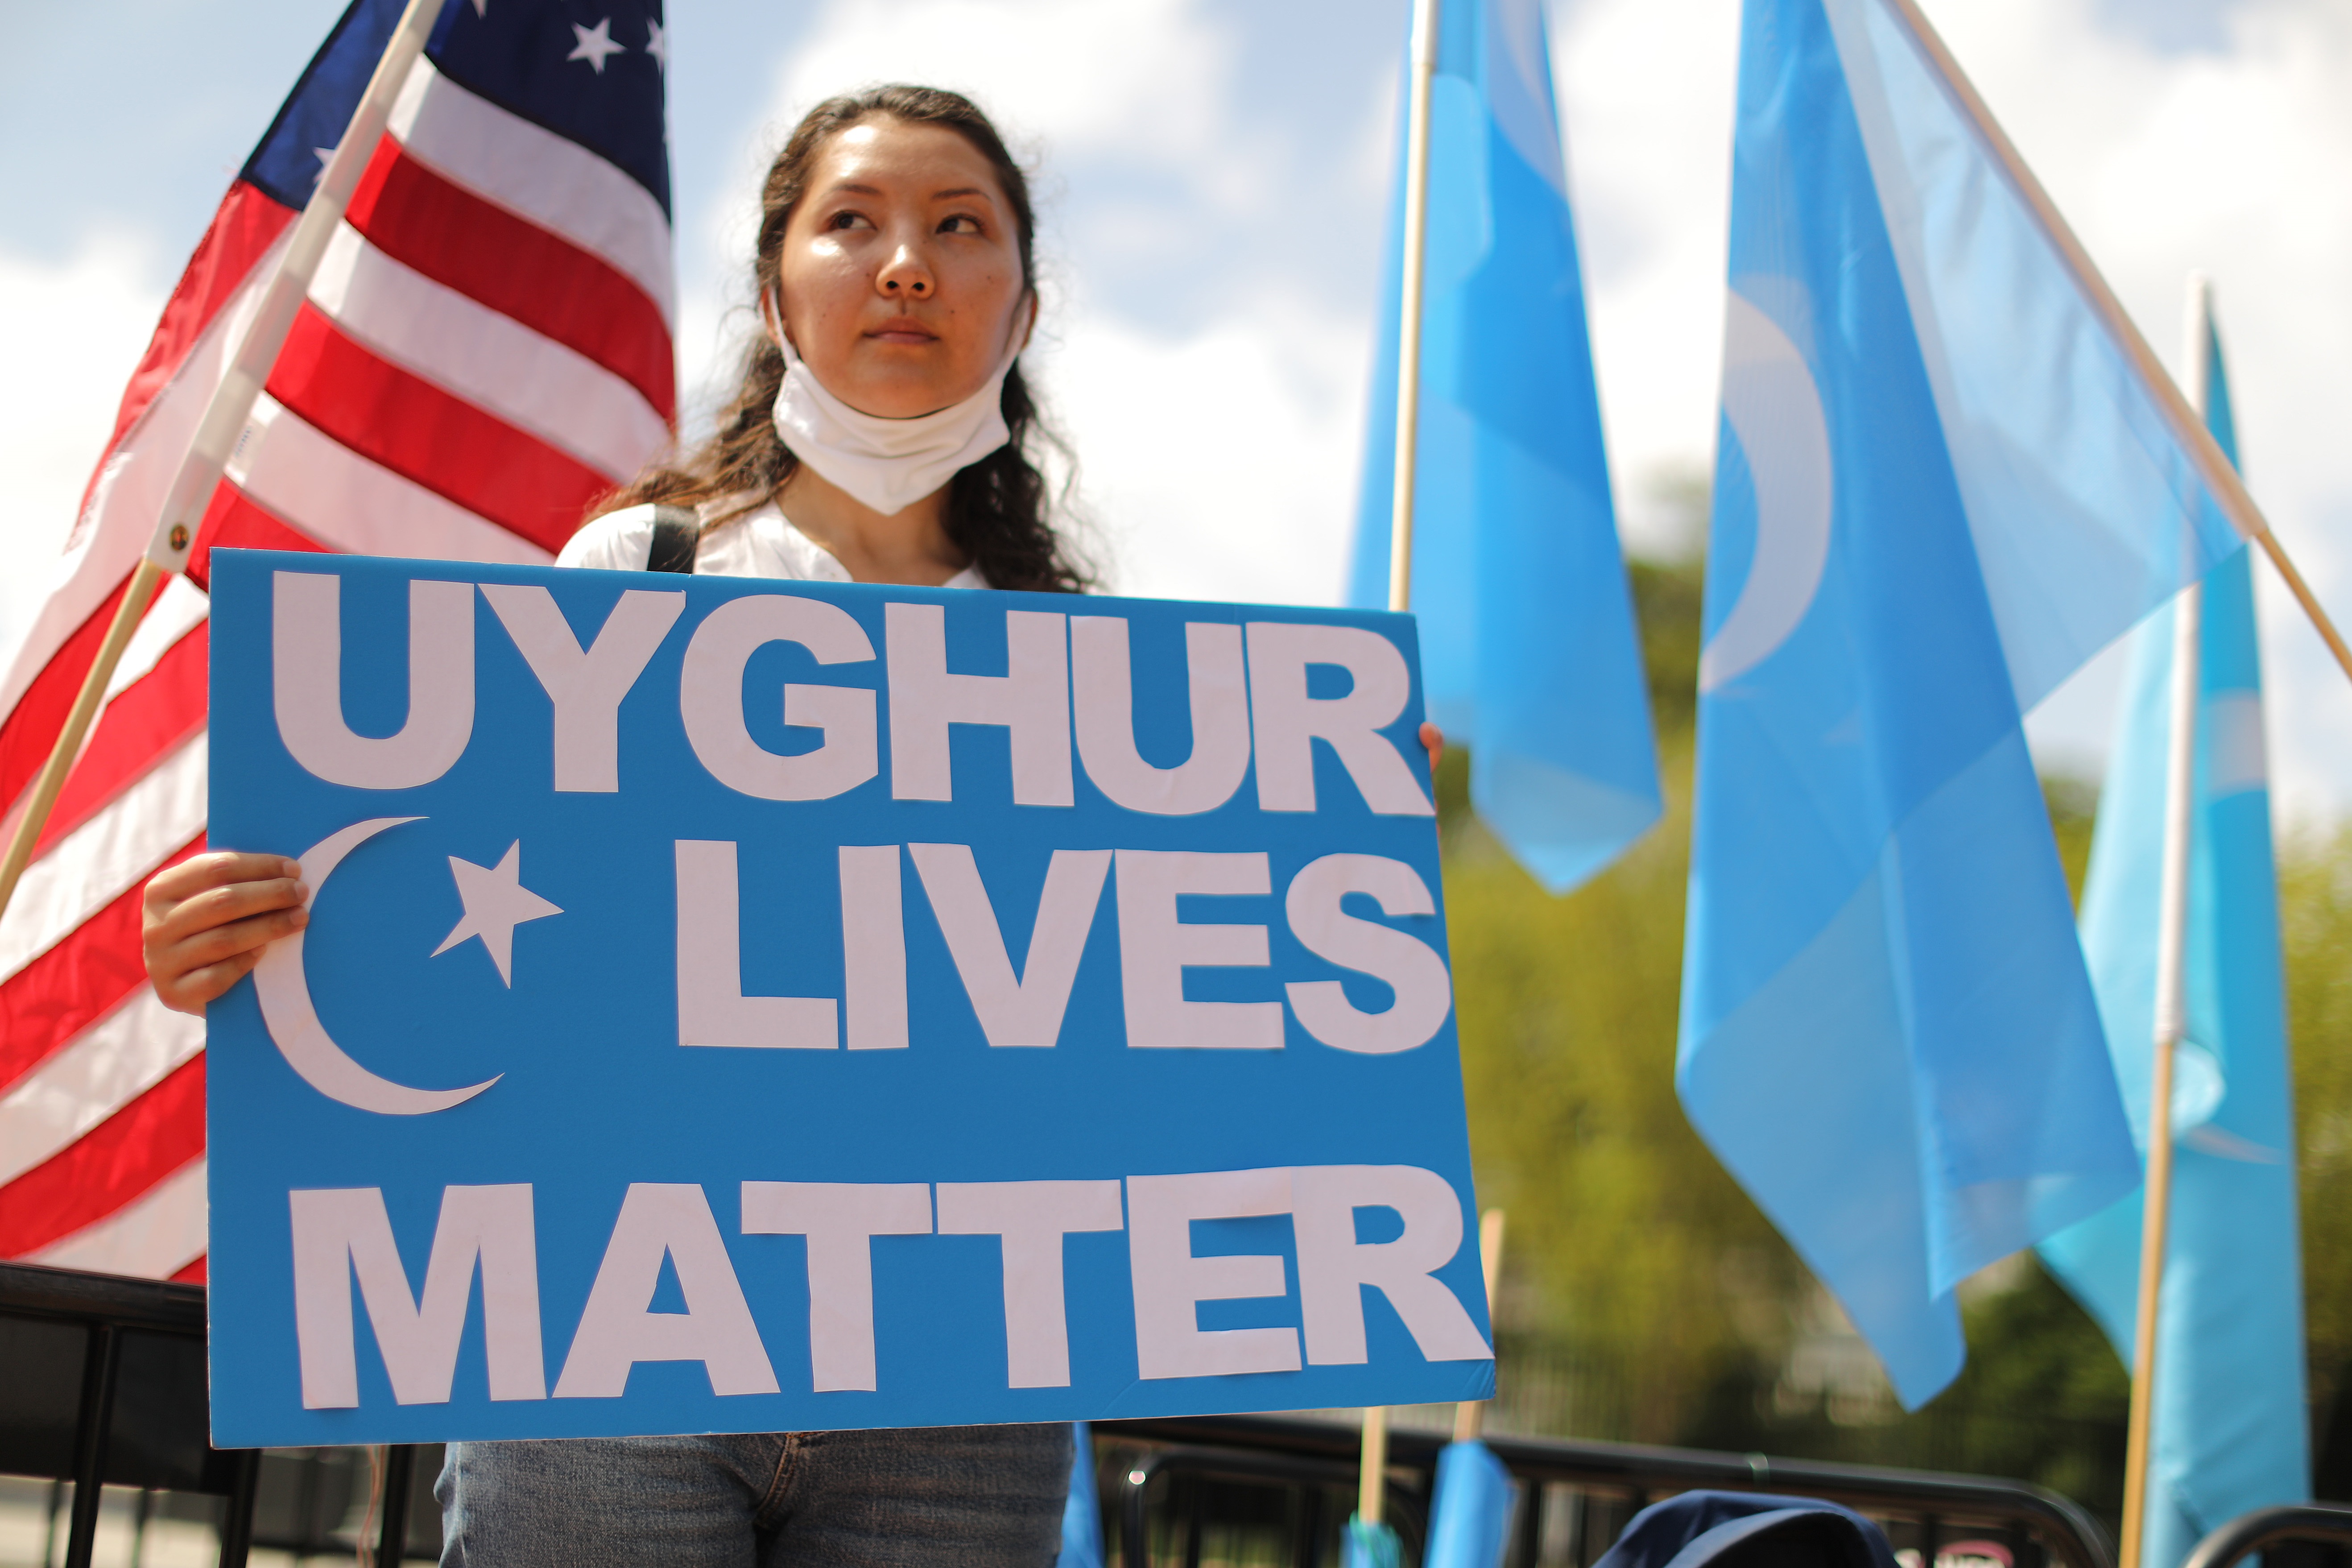 08/14/2020 A protest outside the White House against China calls on the United States to end the trade deal and take action to end the oppression of Uyghurs.  SOMODEVILLA ECONOMIC CHIP